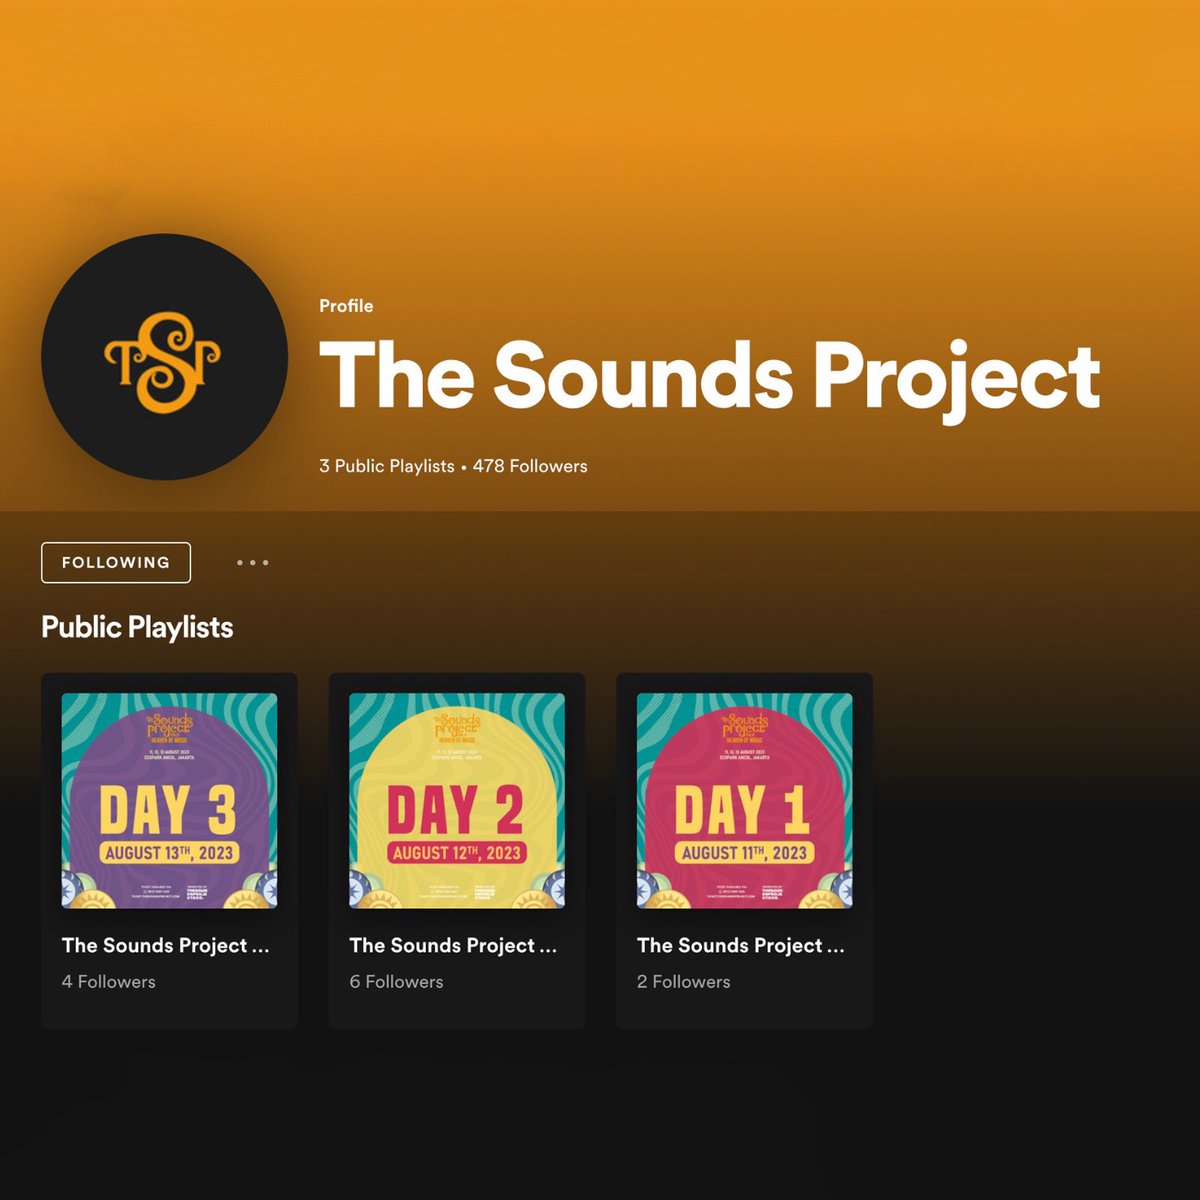 Welcoming weekend and it’s only 𝟮𝟴 𝗱𝗮𝘆𝘀 left to The Sounds Project Vol.6!🥳
Gear up and prepare yourself while you listening out to our Spotify Playlist (search: 𝘁𝗵𝗲𝘀𝗼𝘂𝗻𝗱𝘀𝗽𝗿𝗼𝗷𝗲𝗰𝘁 on Spotify)

Cya there👋🏻❤️

#TSP6 
#HeavenOfMusic 
#TheSoundsProject